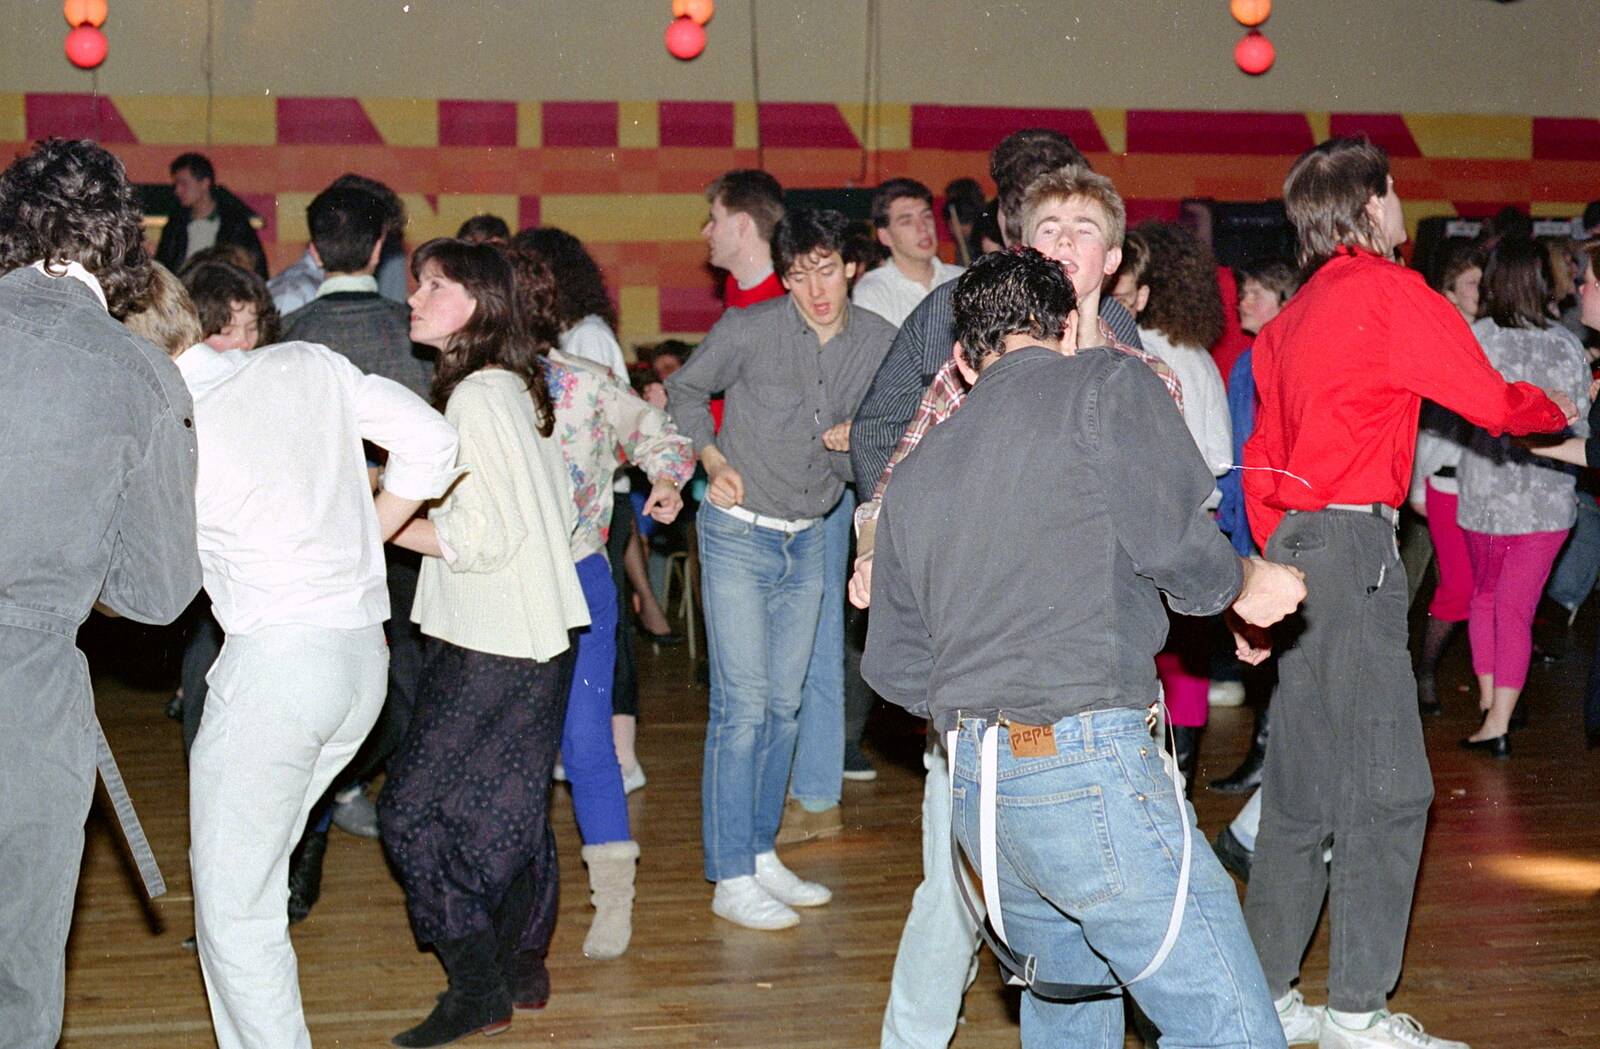 More funky student dancing from Uni: Music Nights and the RAG Ball, Plymouth, Devon - 18th February 1986